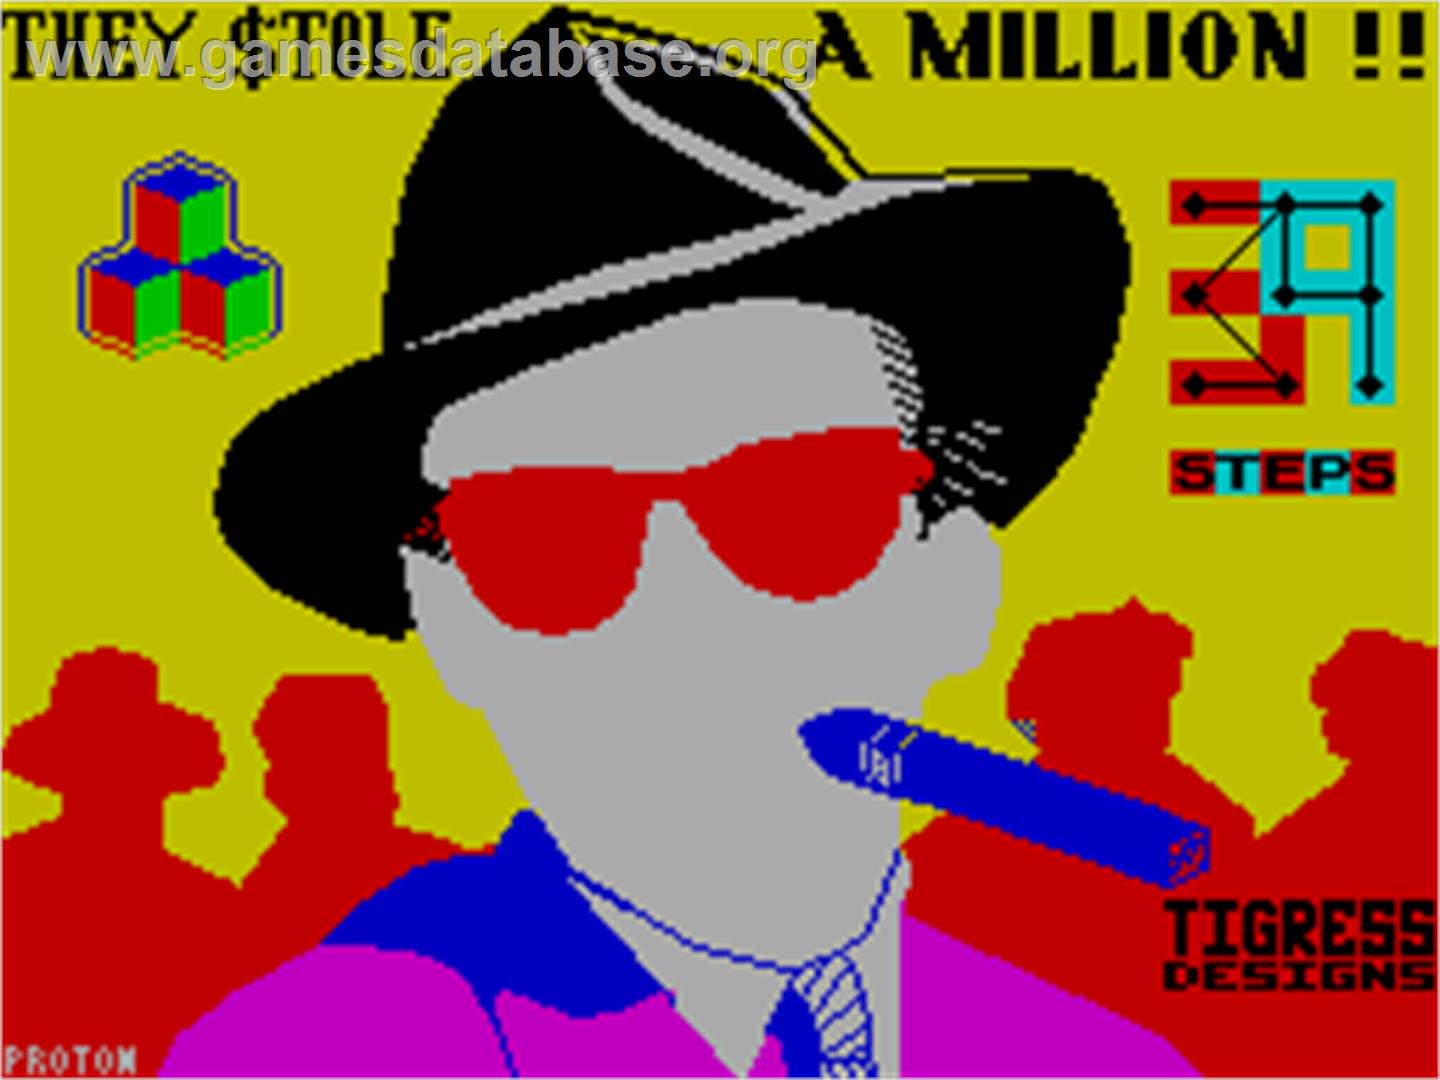 They Sold a Million II - Sinclair ZX Spectrum - Artwork - Title Screen